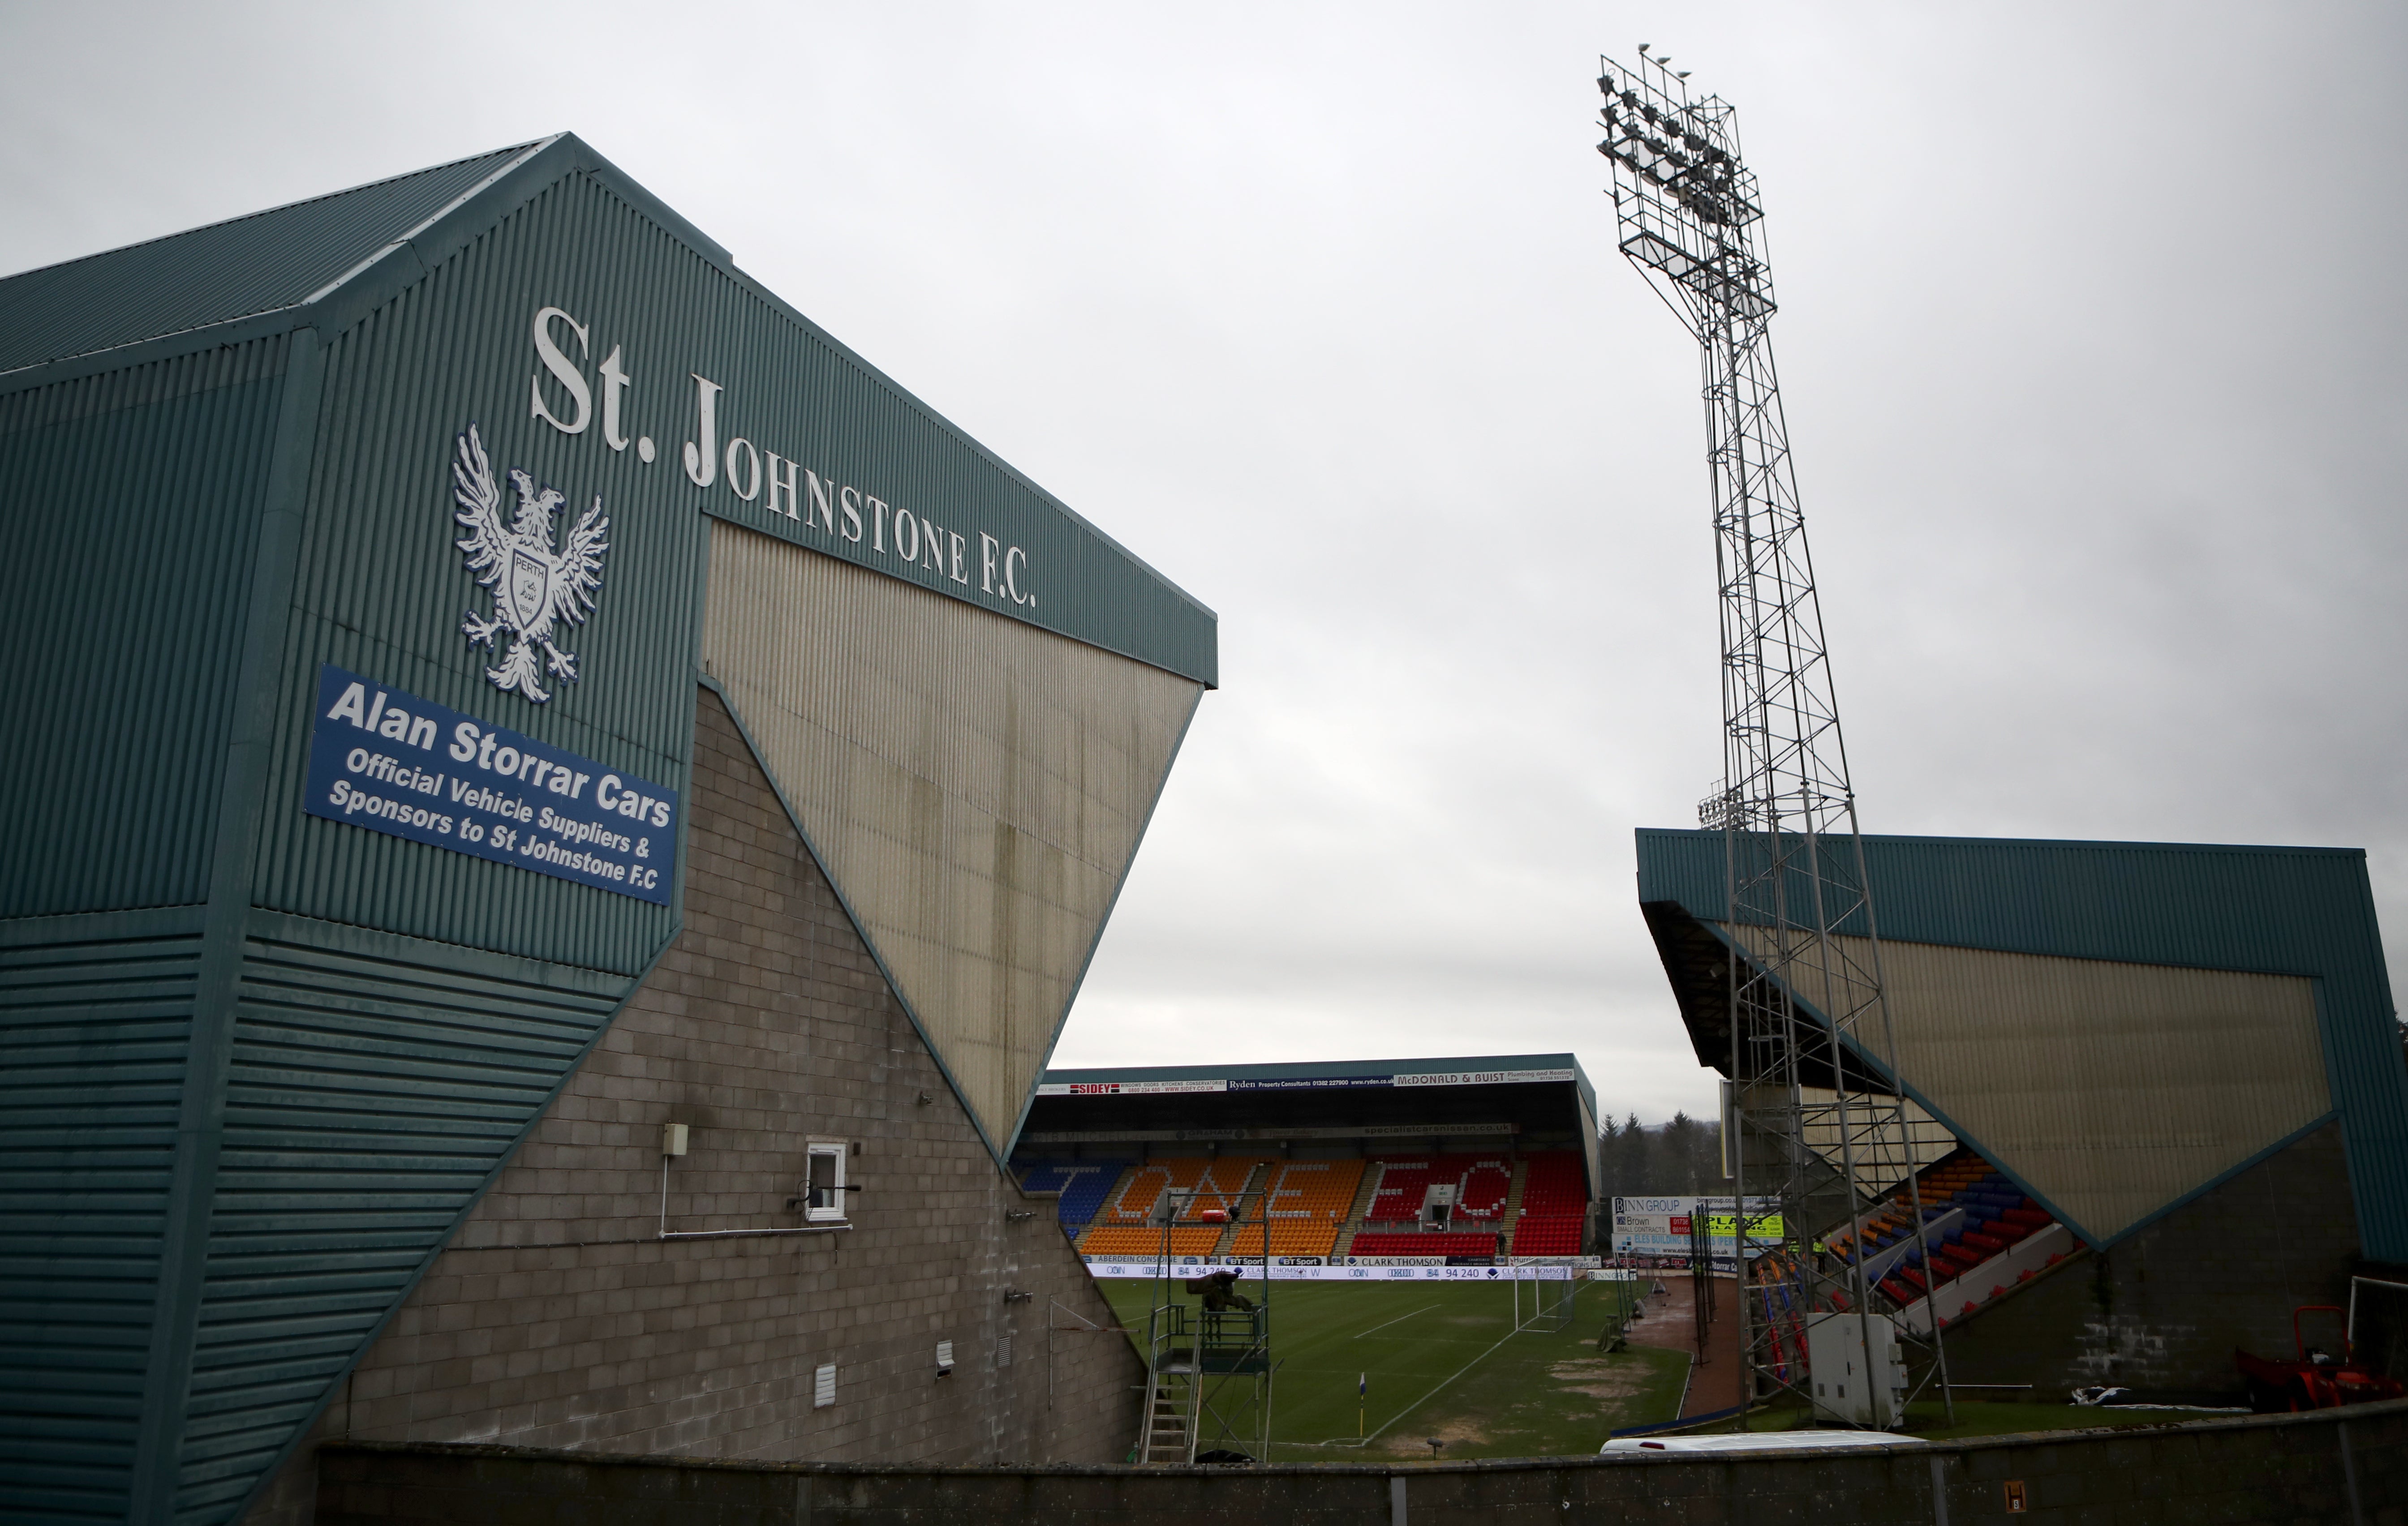 St Johnstone have urged fans to stay away on Scottish Cup final day